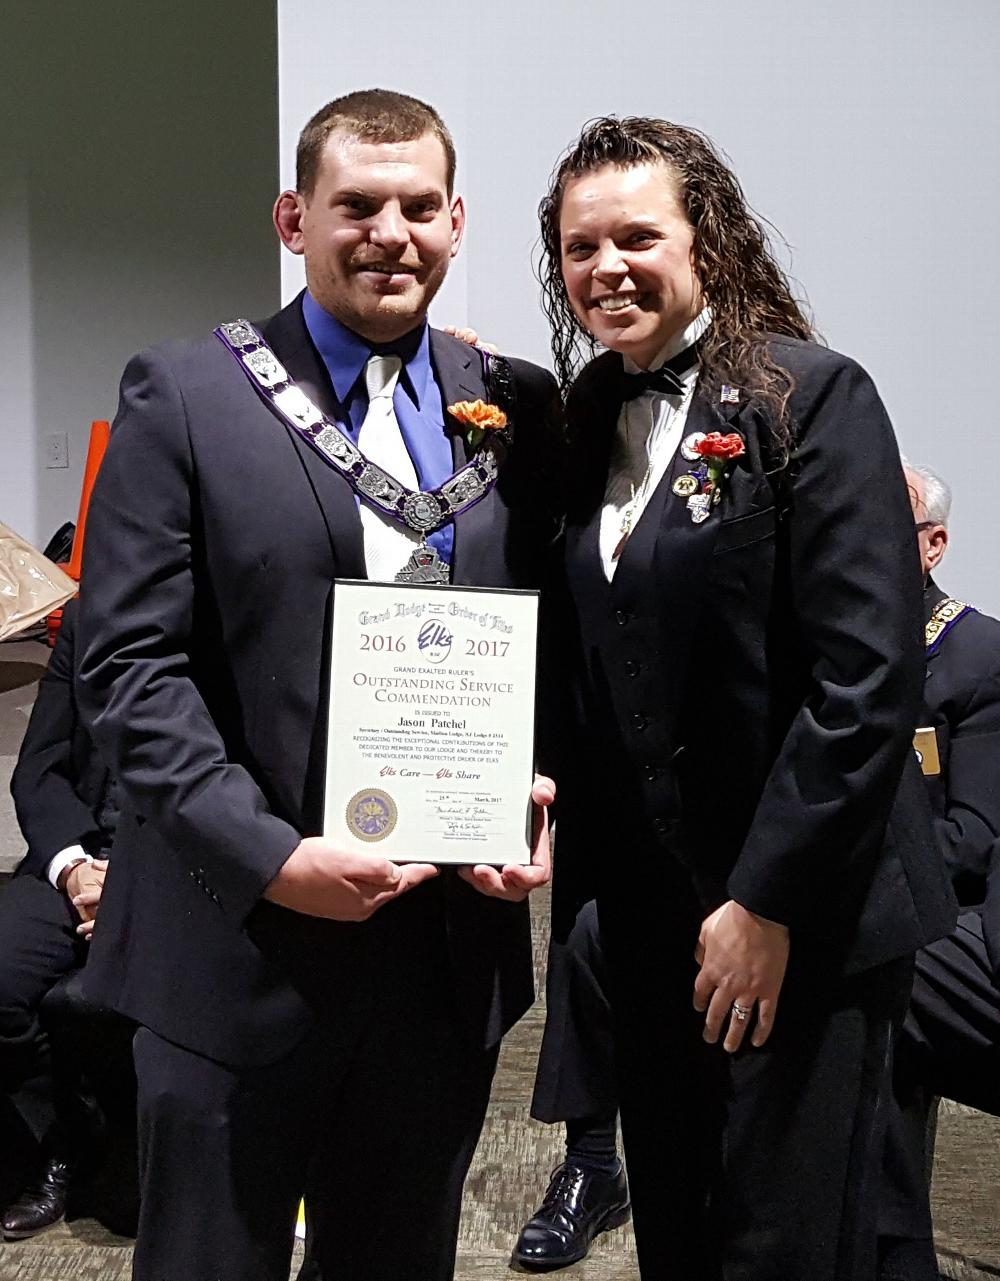 Jason Patchel receives an Outstanding Service Commendation from Exalted Ruler Allison.